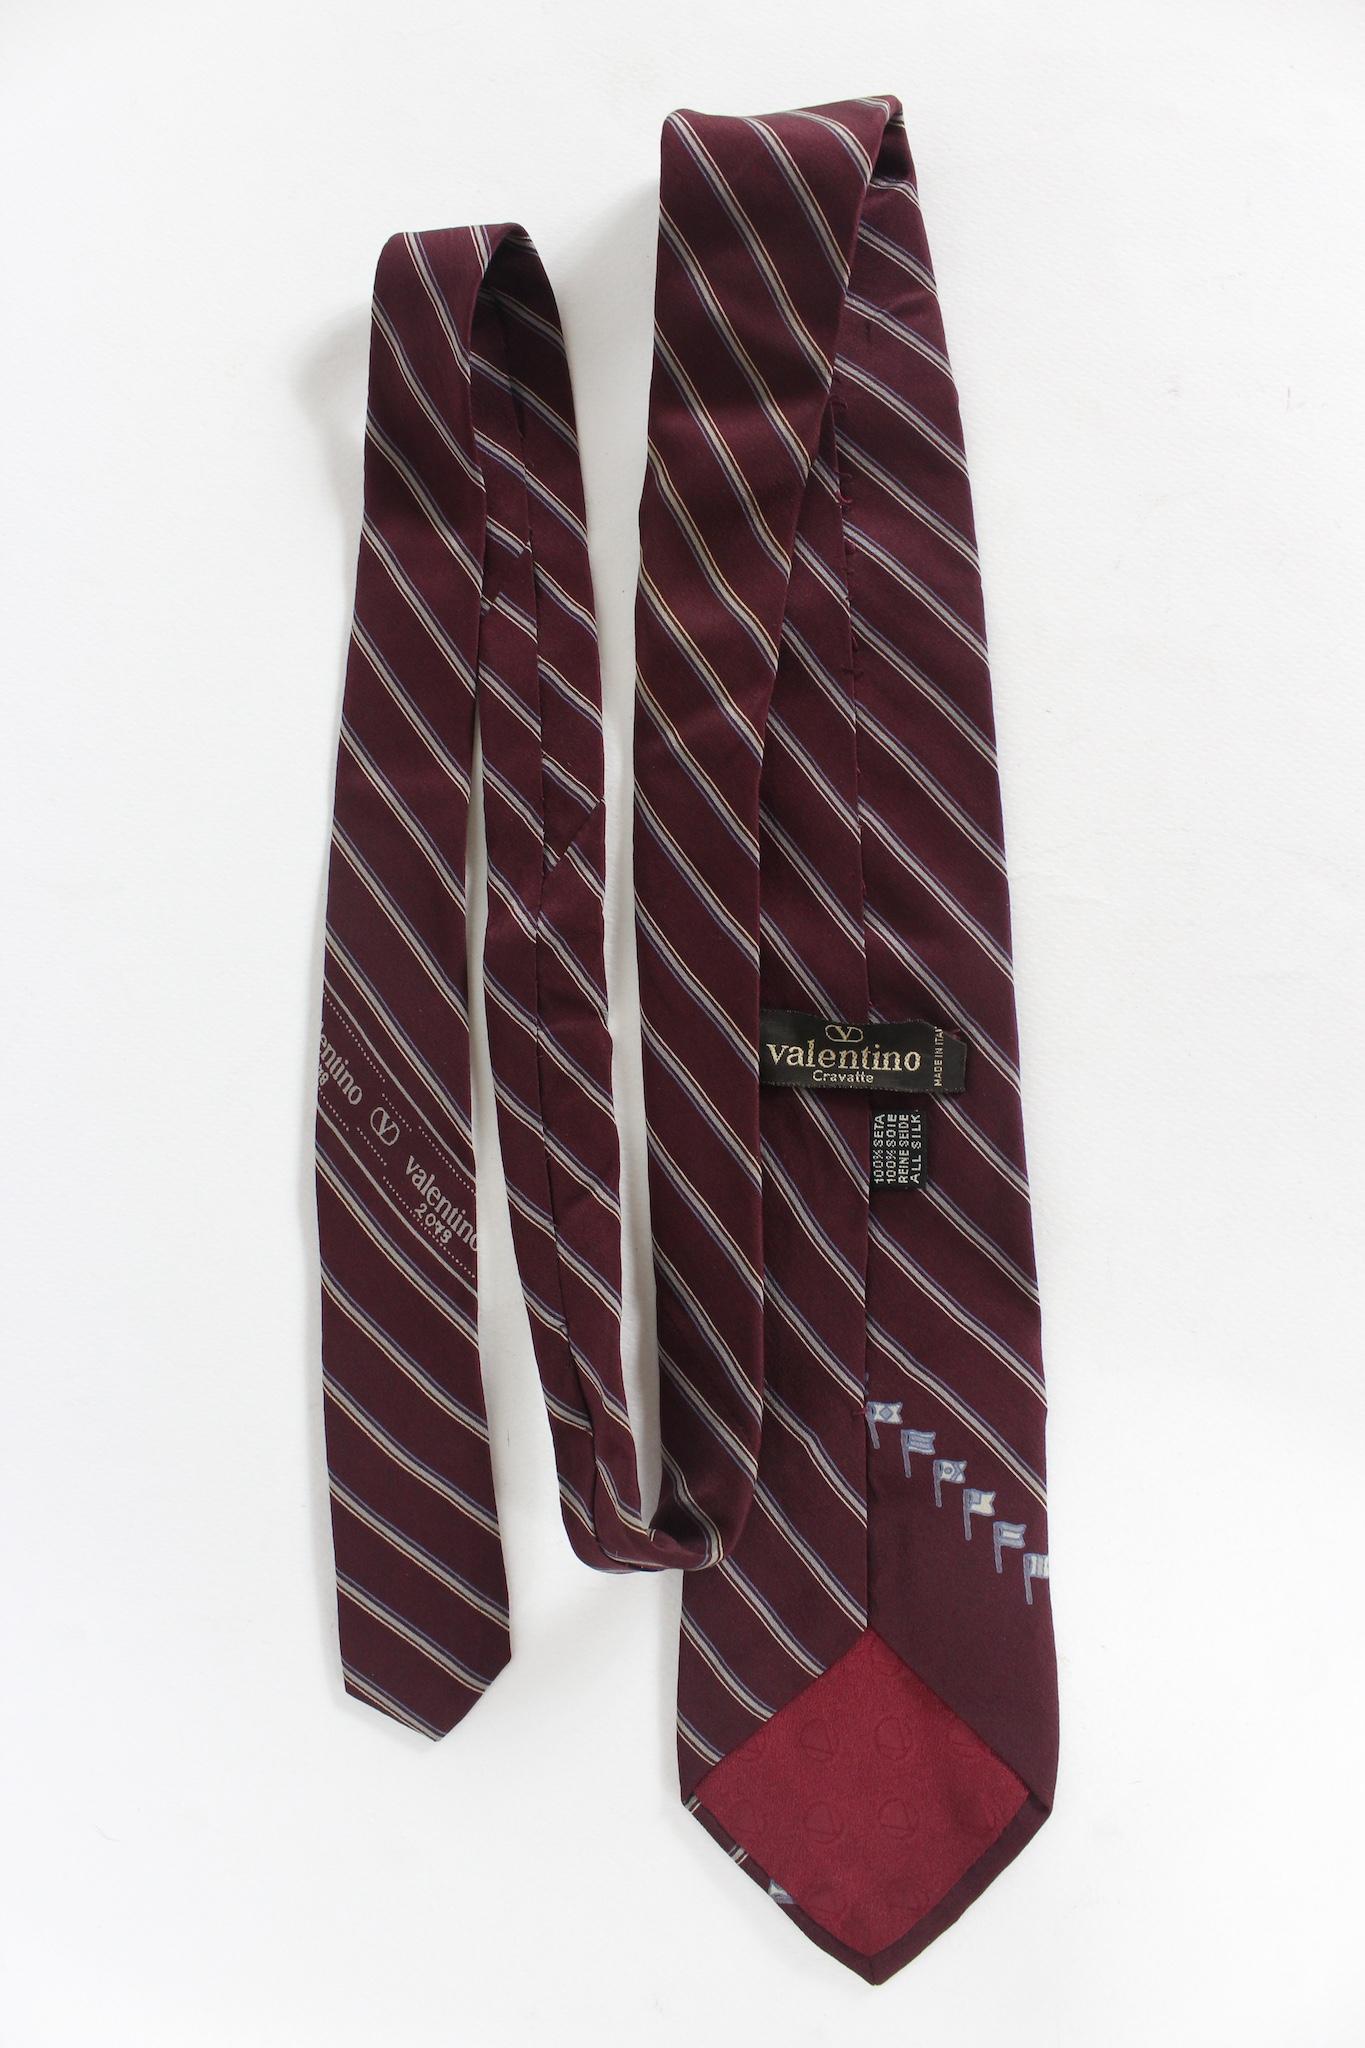 Valentino vintage 90s tie. Red color with beige stripes. 100% silk fabric. Made in italy.

Length: 143 cm
Width: 8 cm